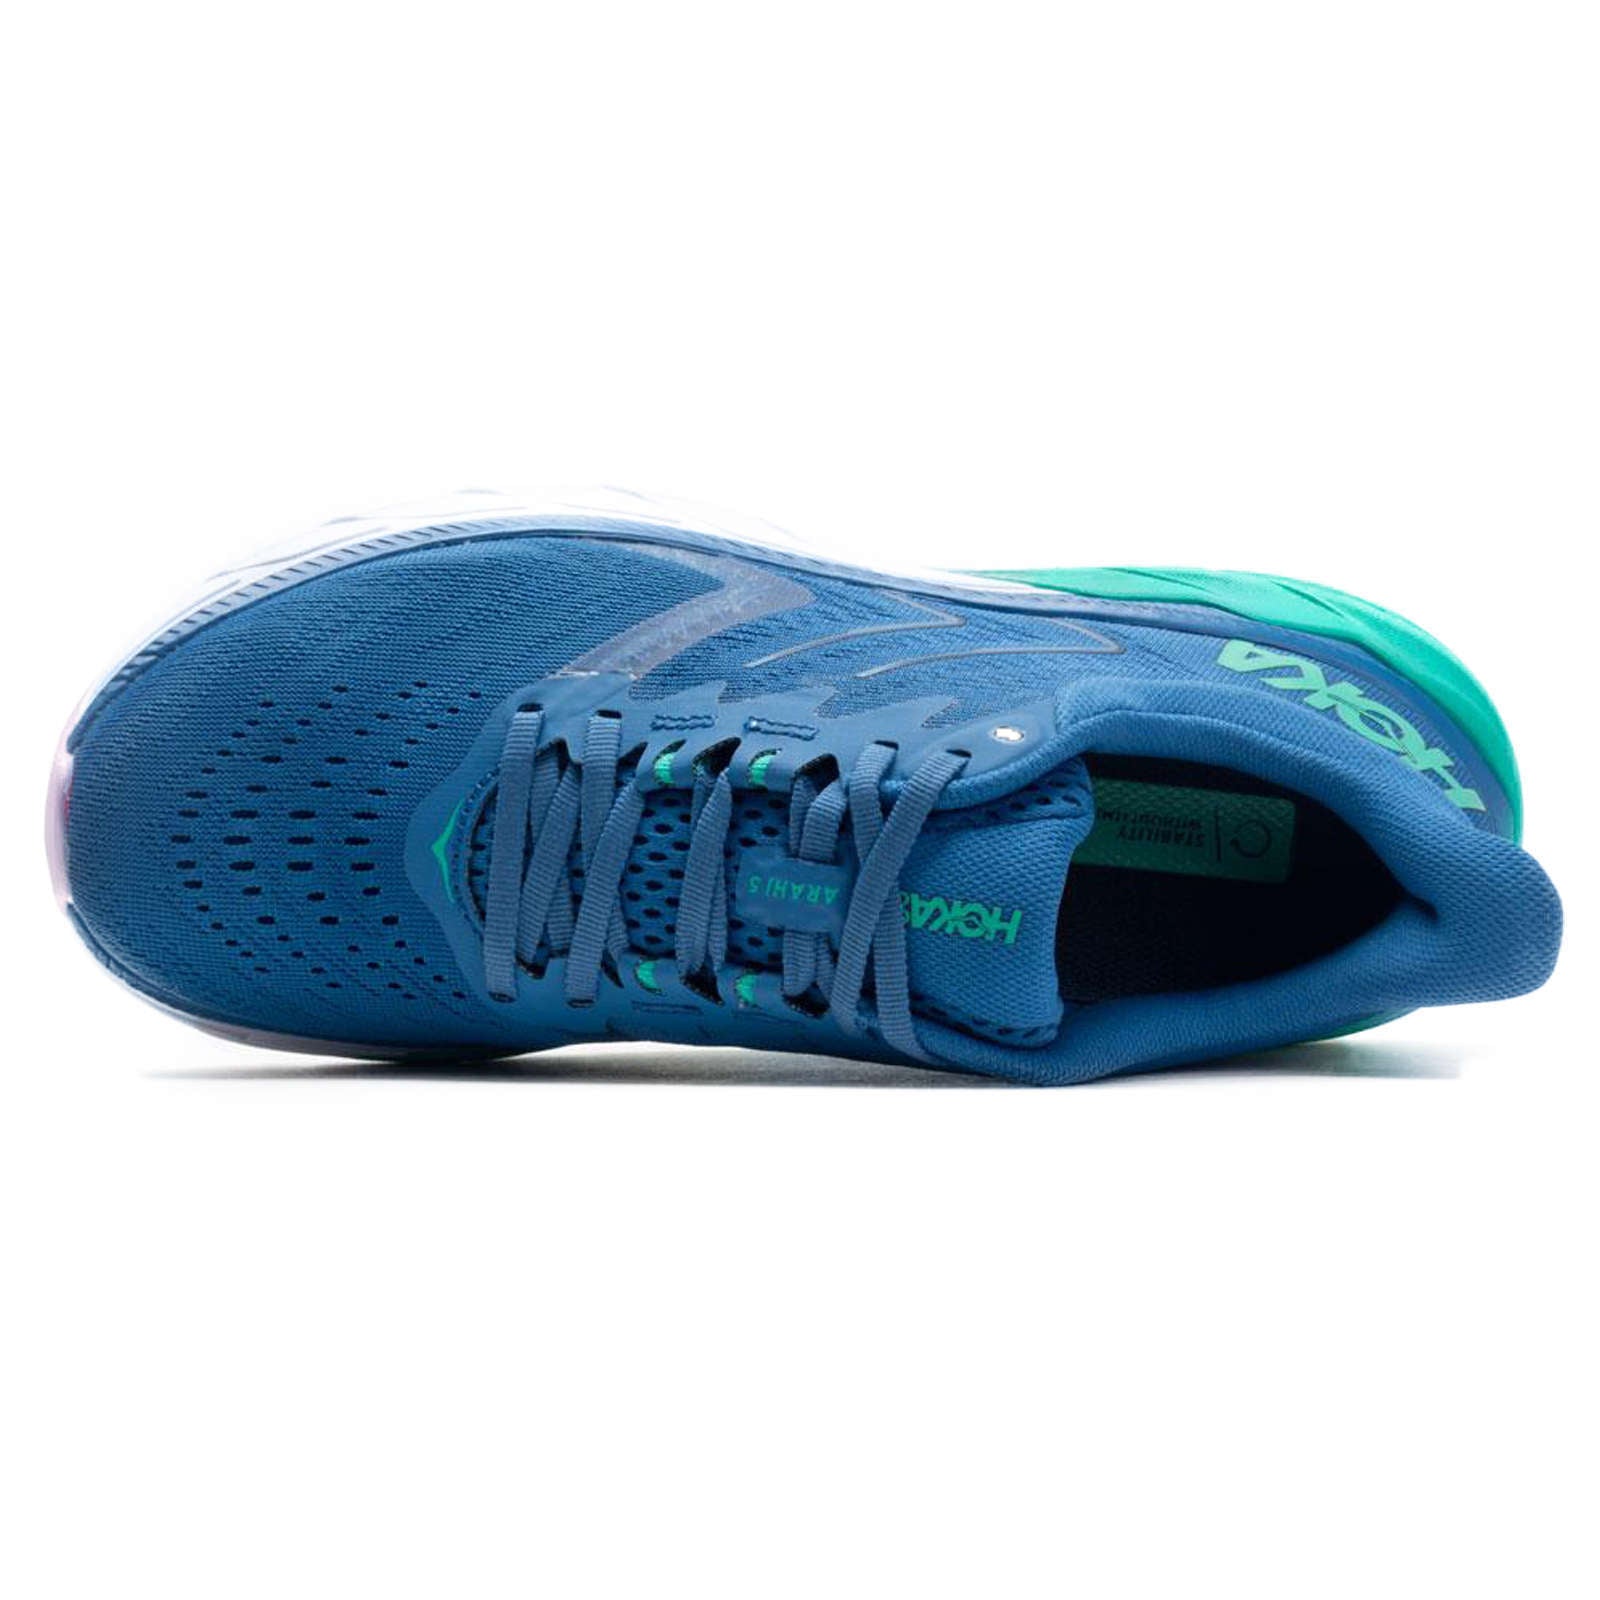 Hoka One One Arahi 5 Synthetic Textile Women's Low-Top Road Running Trainers#color_vallarta blue atlantis